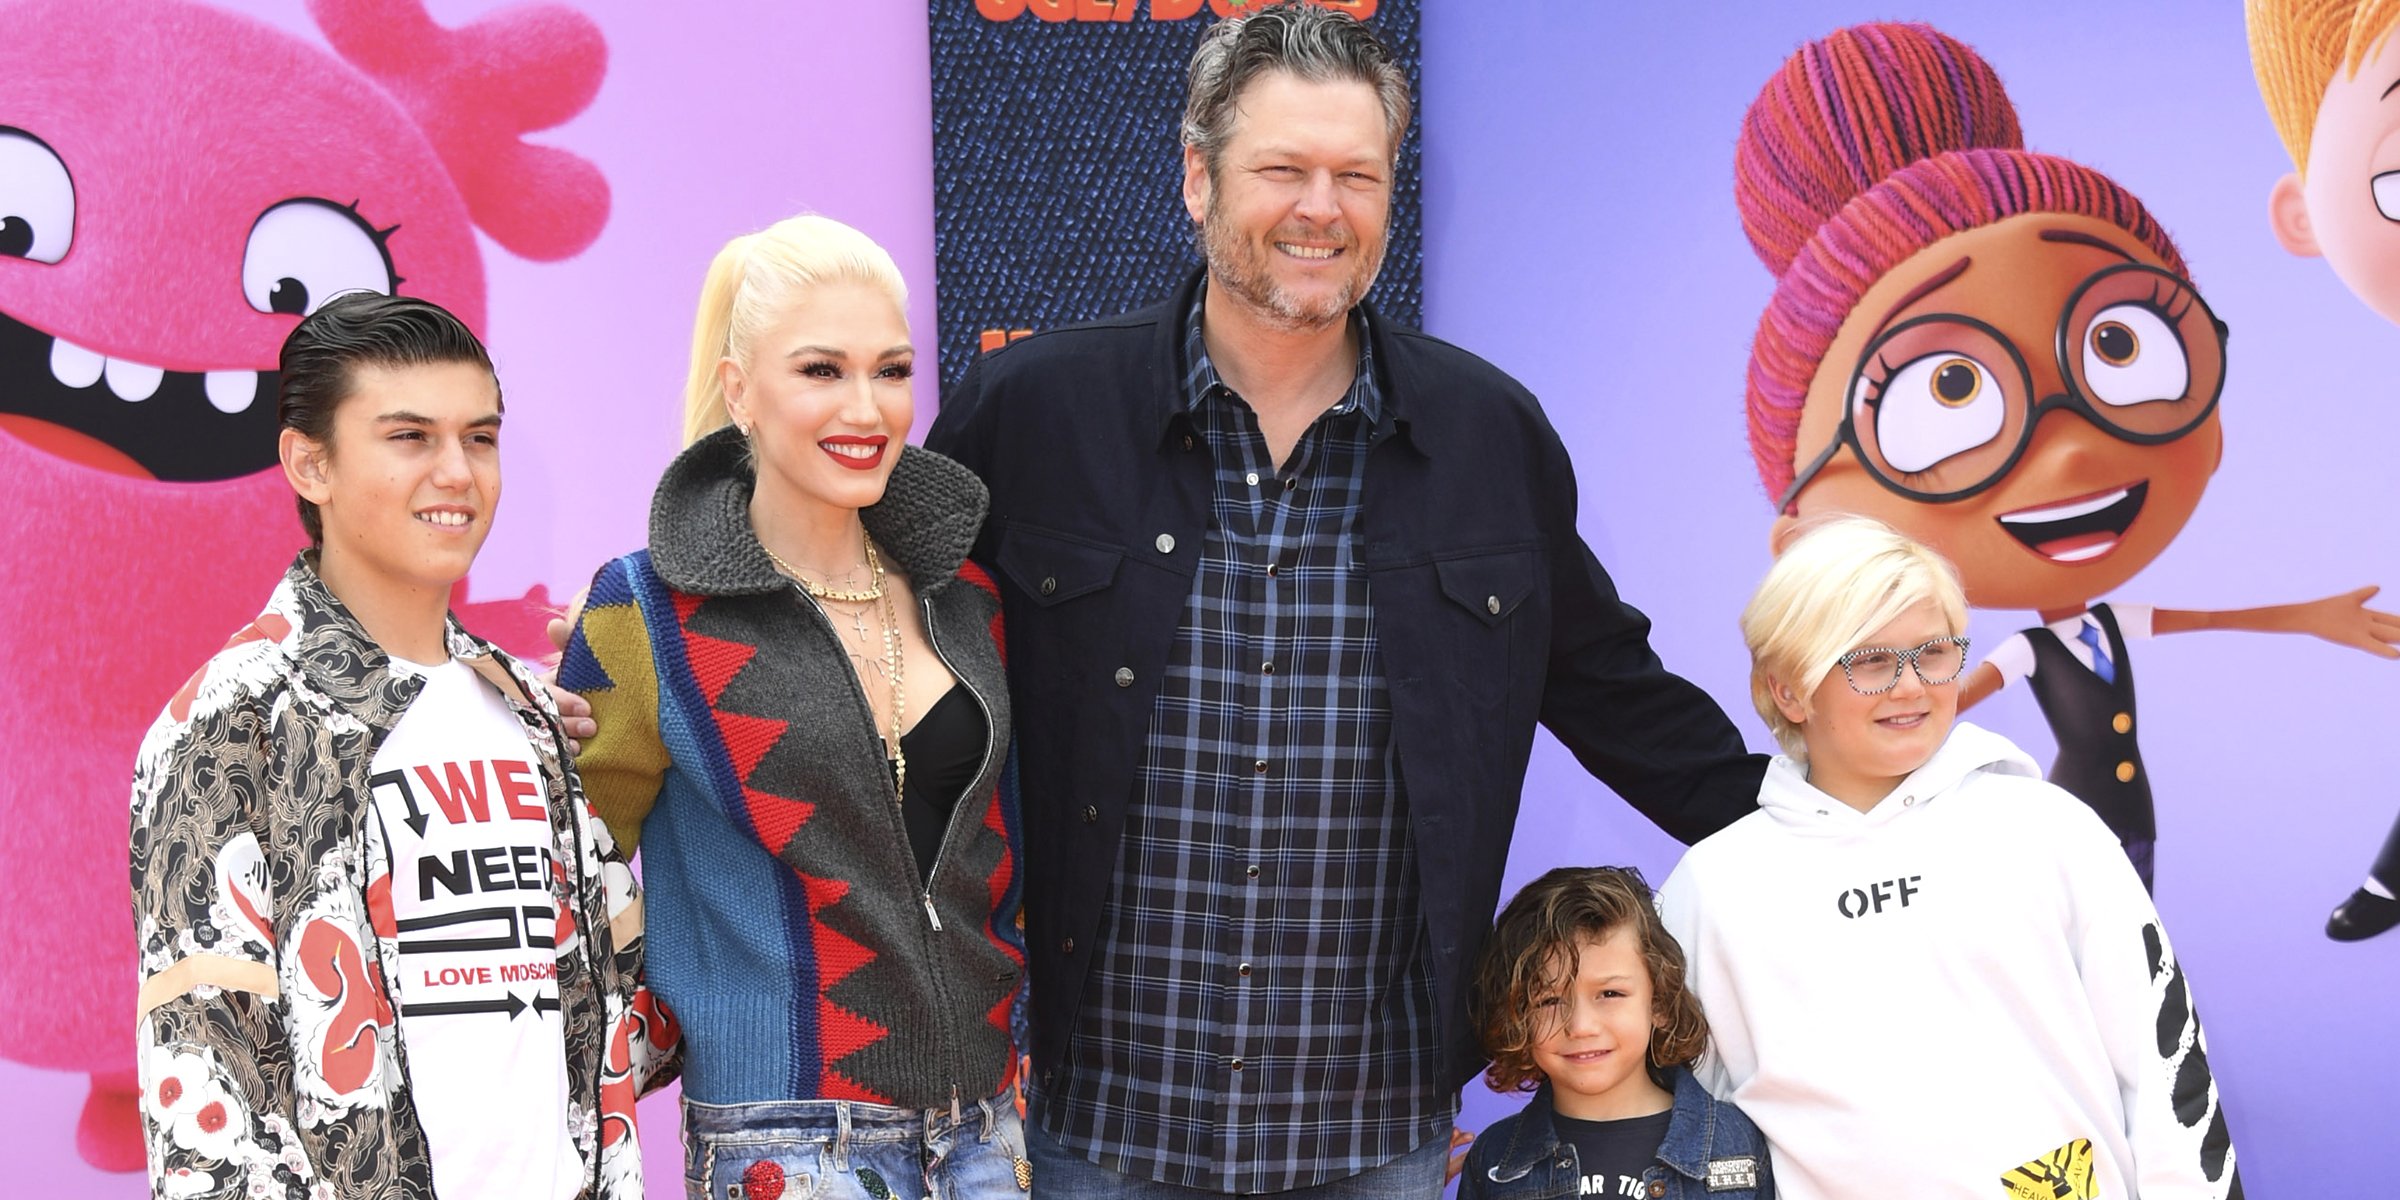 Gwen Stefani and Blake Shelton, together with Stefani's three sons Kingston, Apollo, and Zuma. | Source: Getty Images